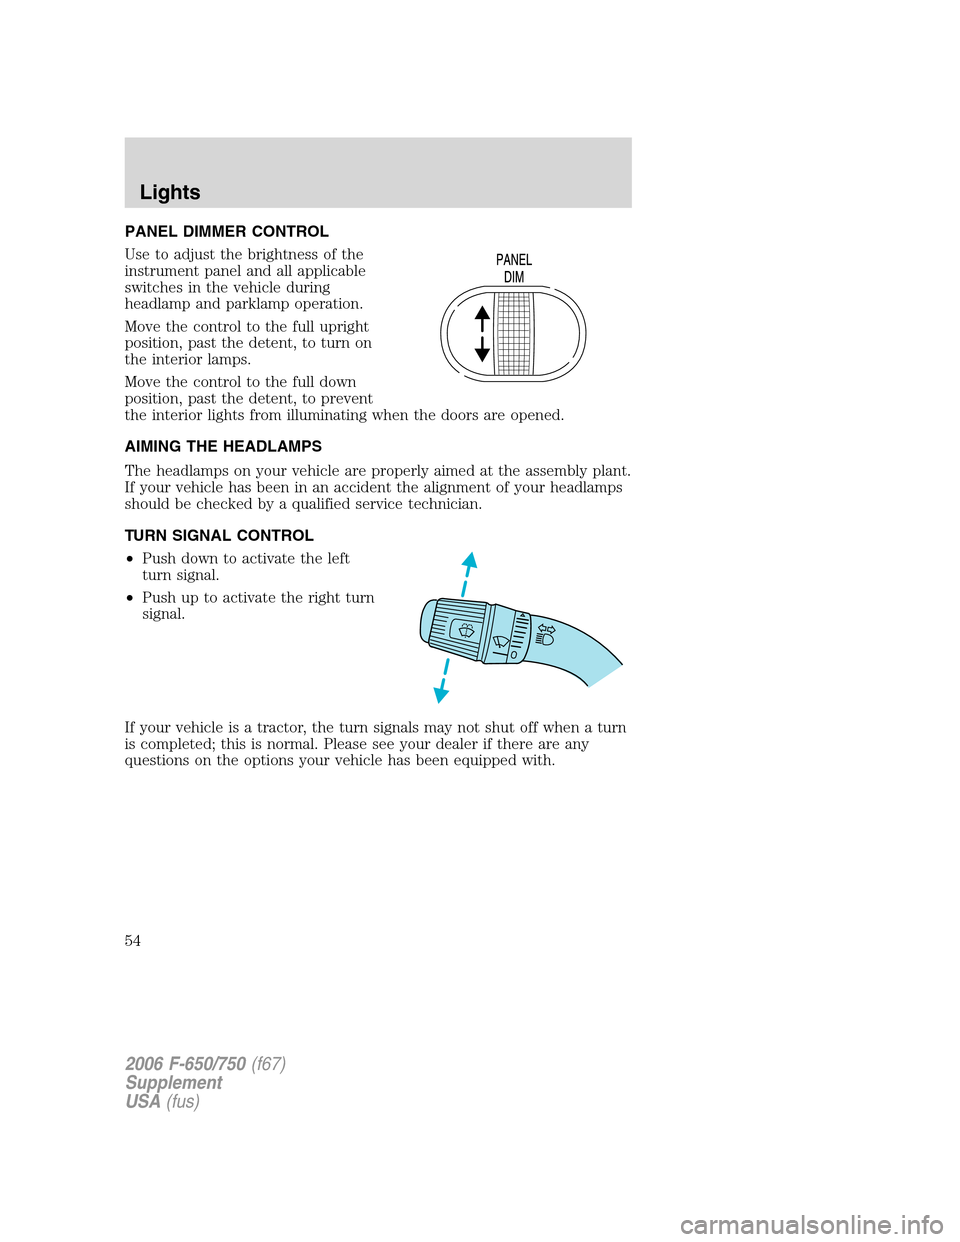 FORD F750 2006 11.G Owners Manual PANEL DIMMER CONTROL
Use to adjust the brightness of the
instrument panel and all applicable
switches in the vehicle during
headlamp and parklamp operation.
Move the control to the full upright
positi